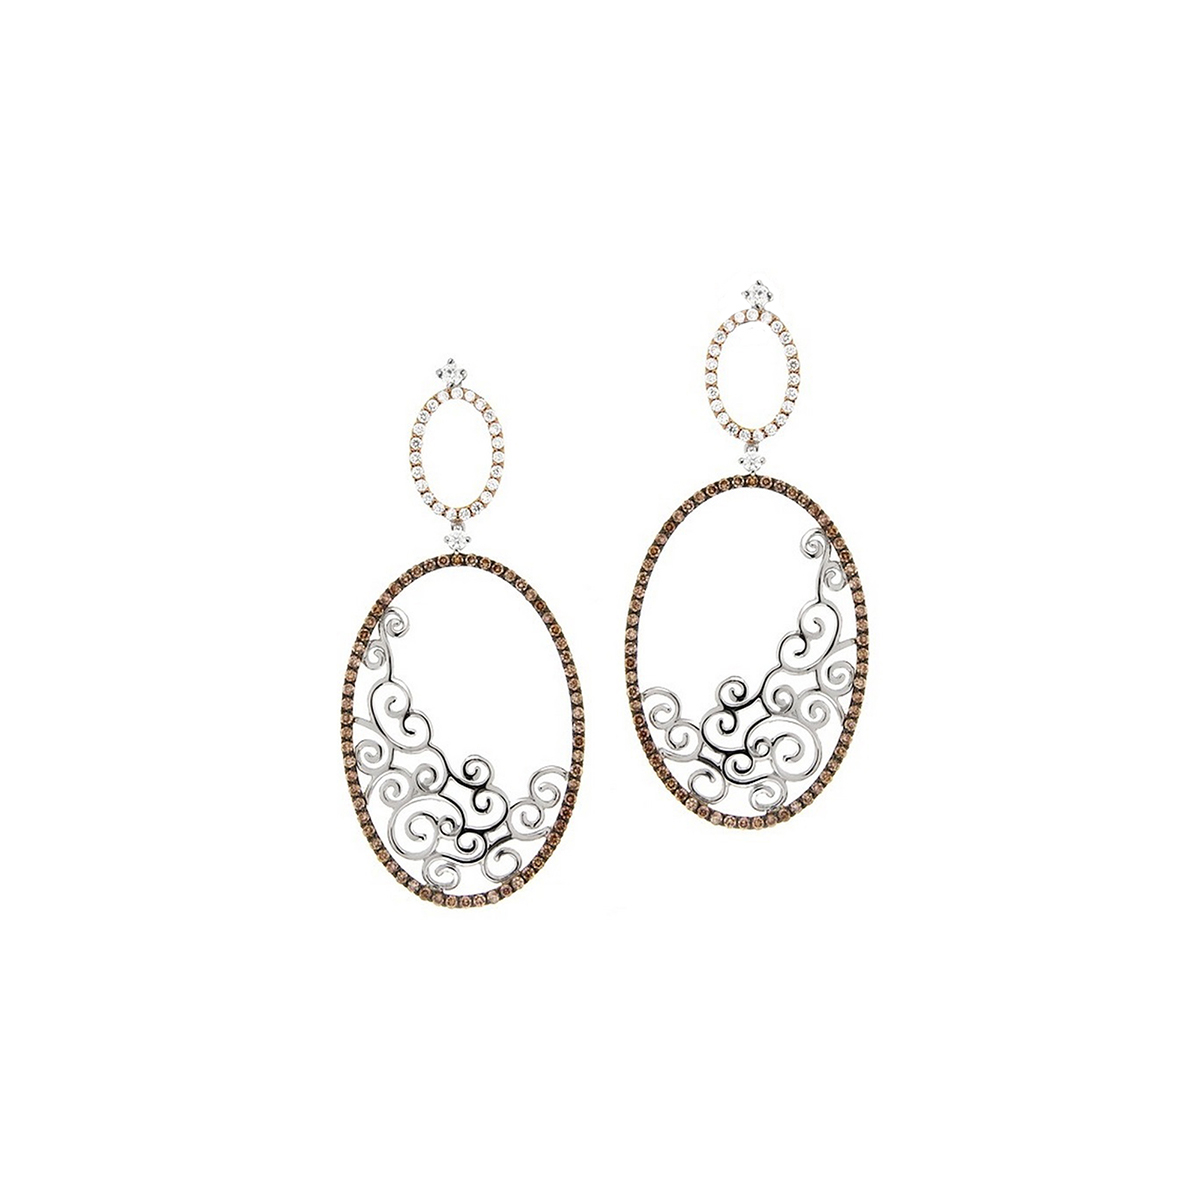 18 K Rose and White Gold Twirl Oval Earrings with White and Brown Diamonds